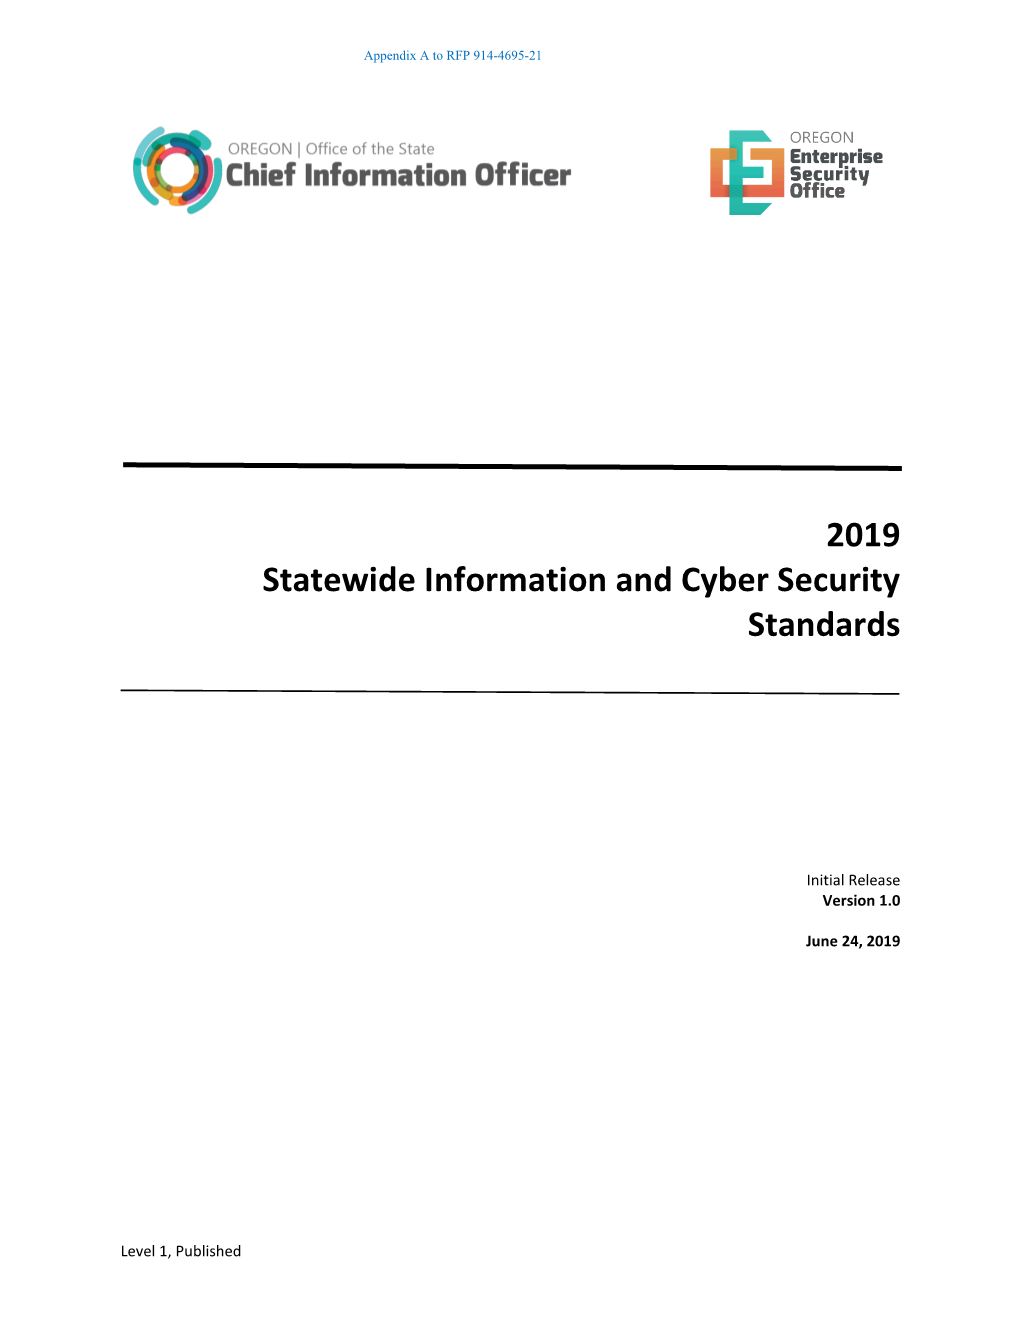 2019 Statewide Information and Cyber Security Standards